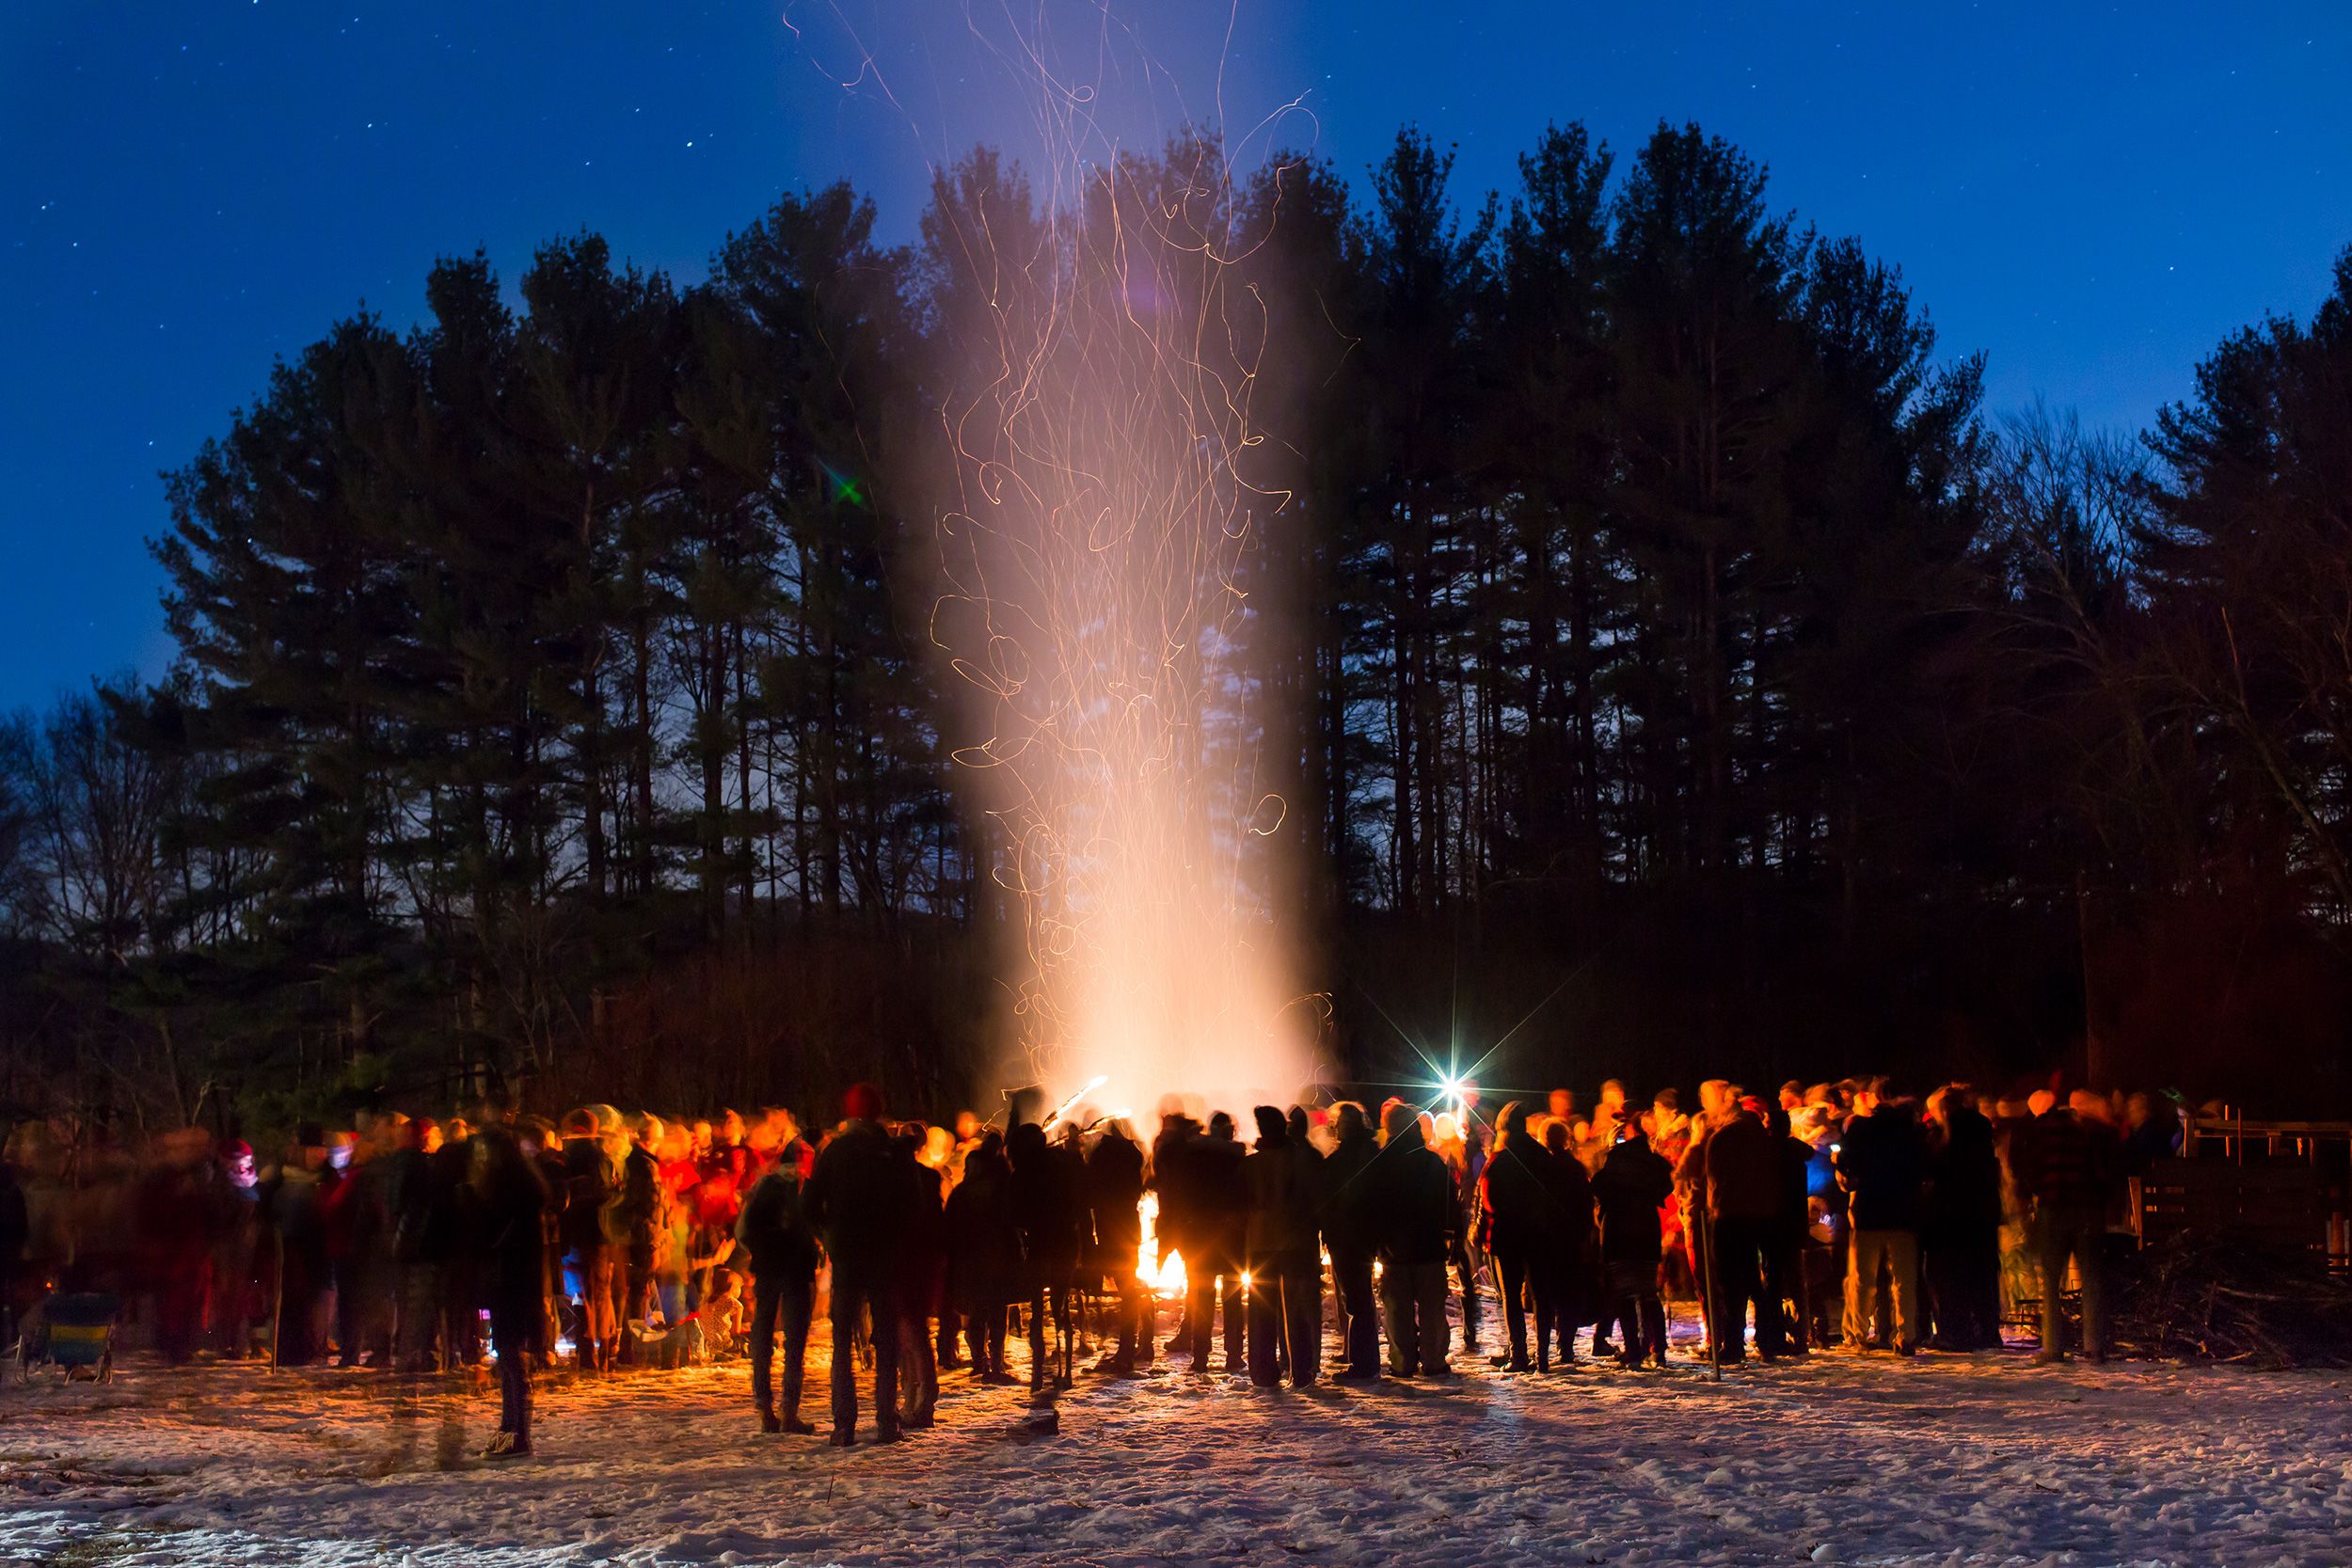 Winter Solstice at Arcadia is one of the most exciting winter events in Western MA!